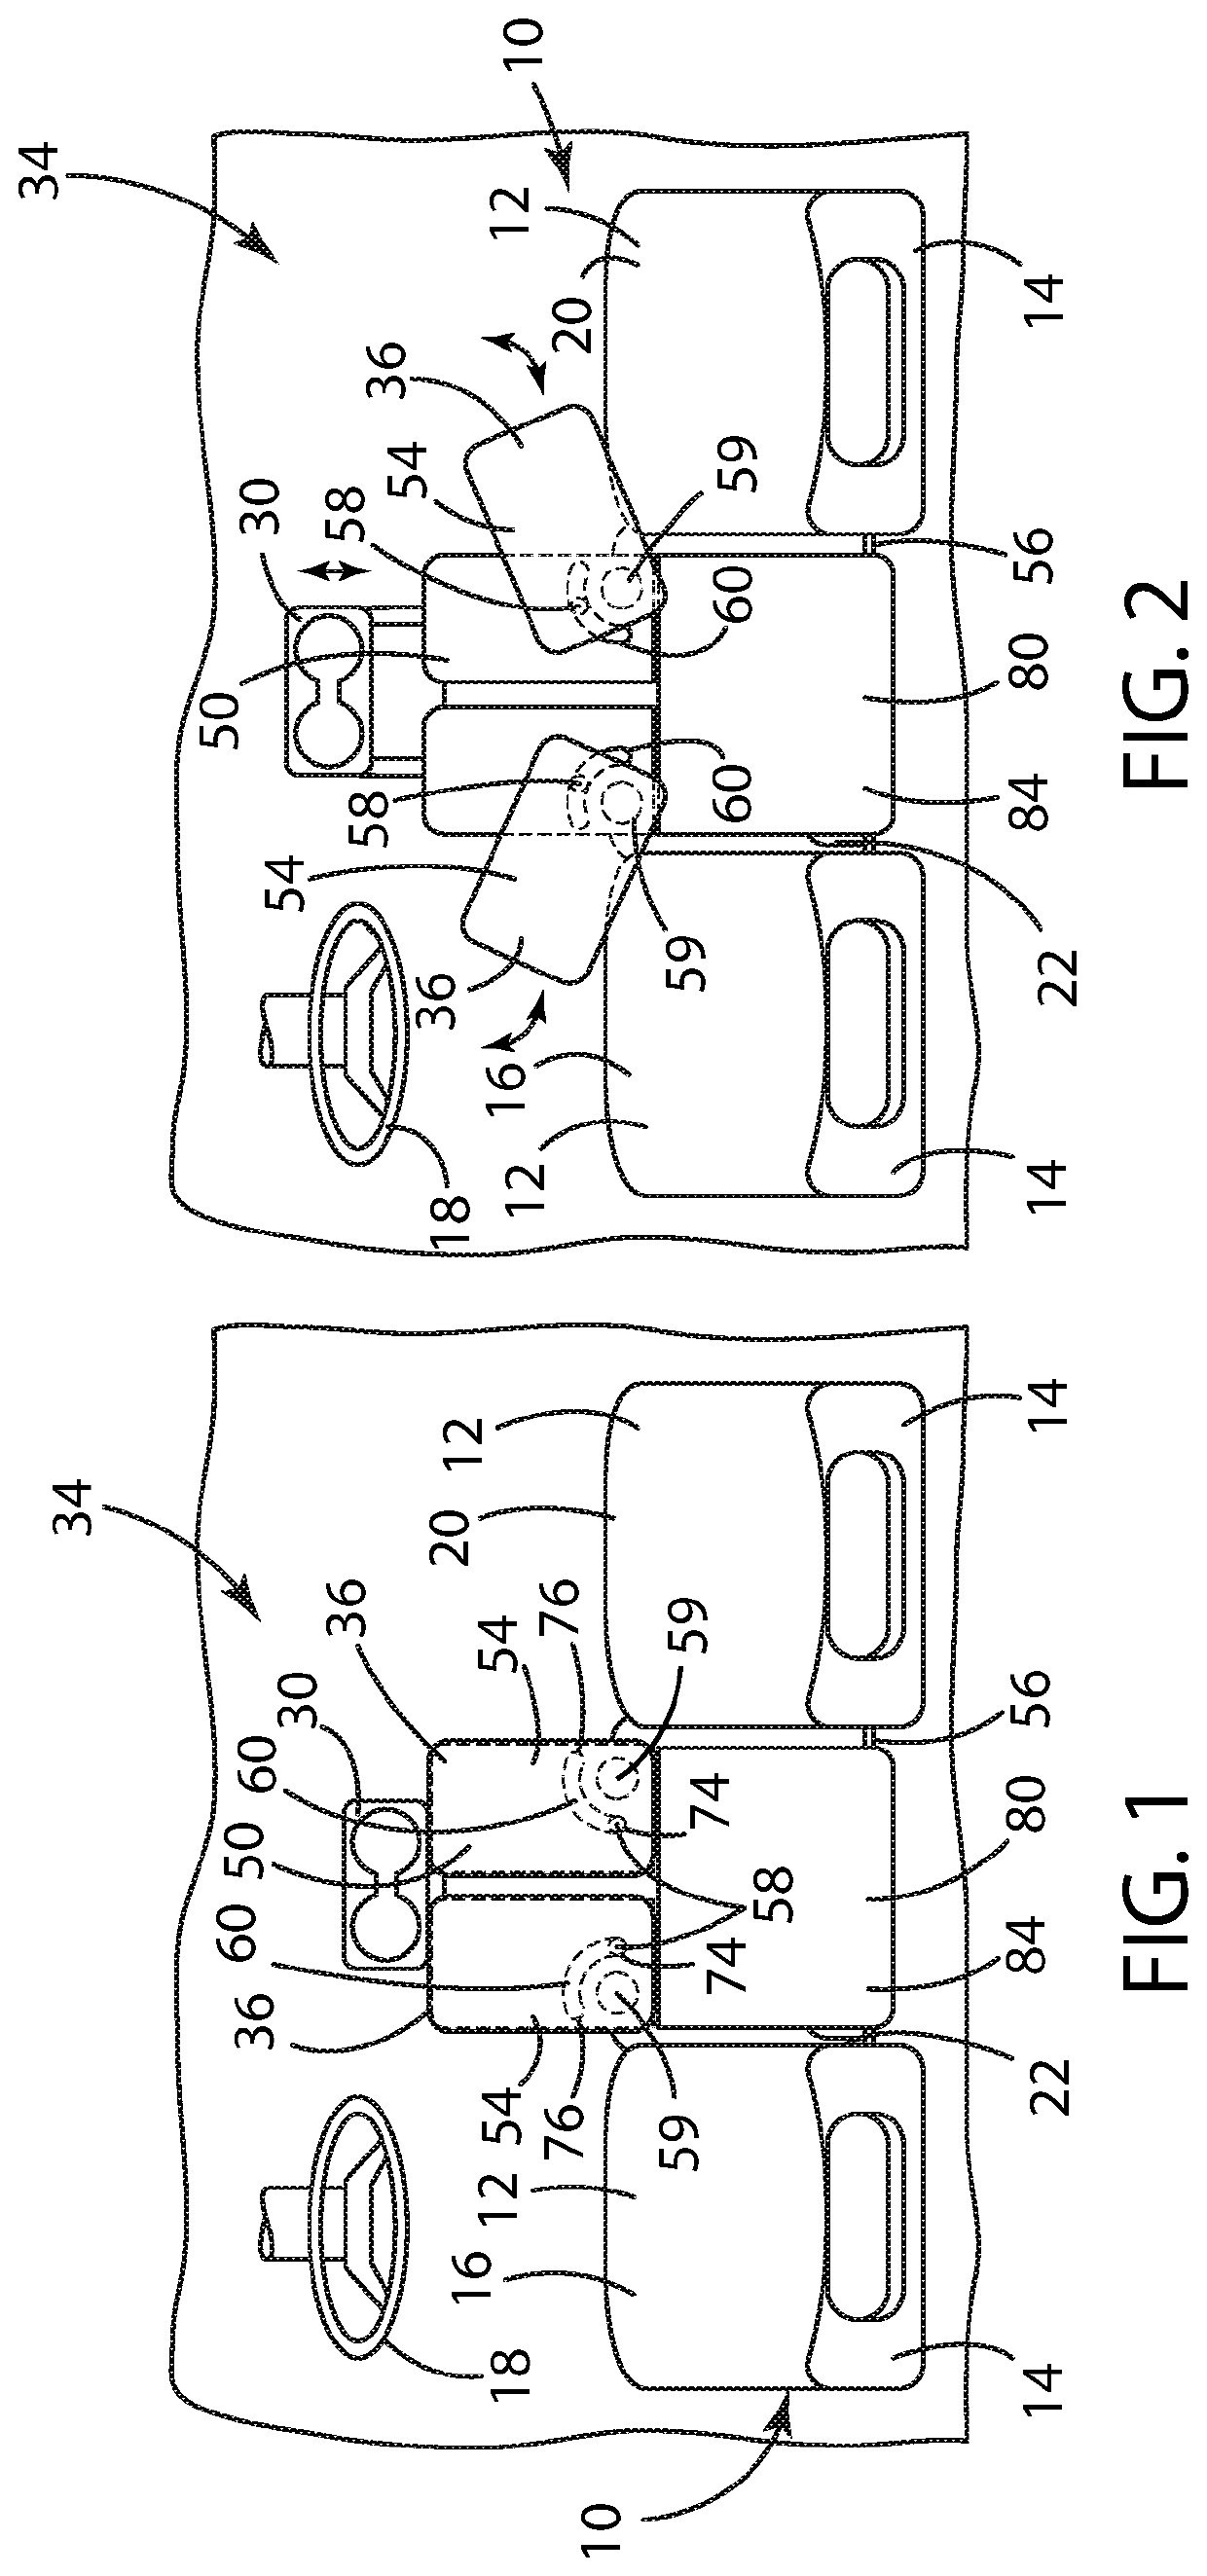 Flexible motor vehicle work surface for laptops and tablets